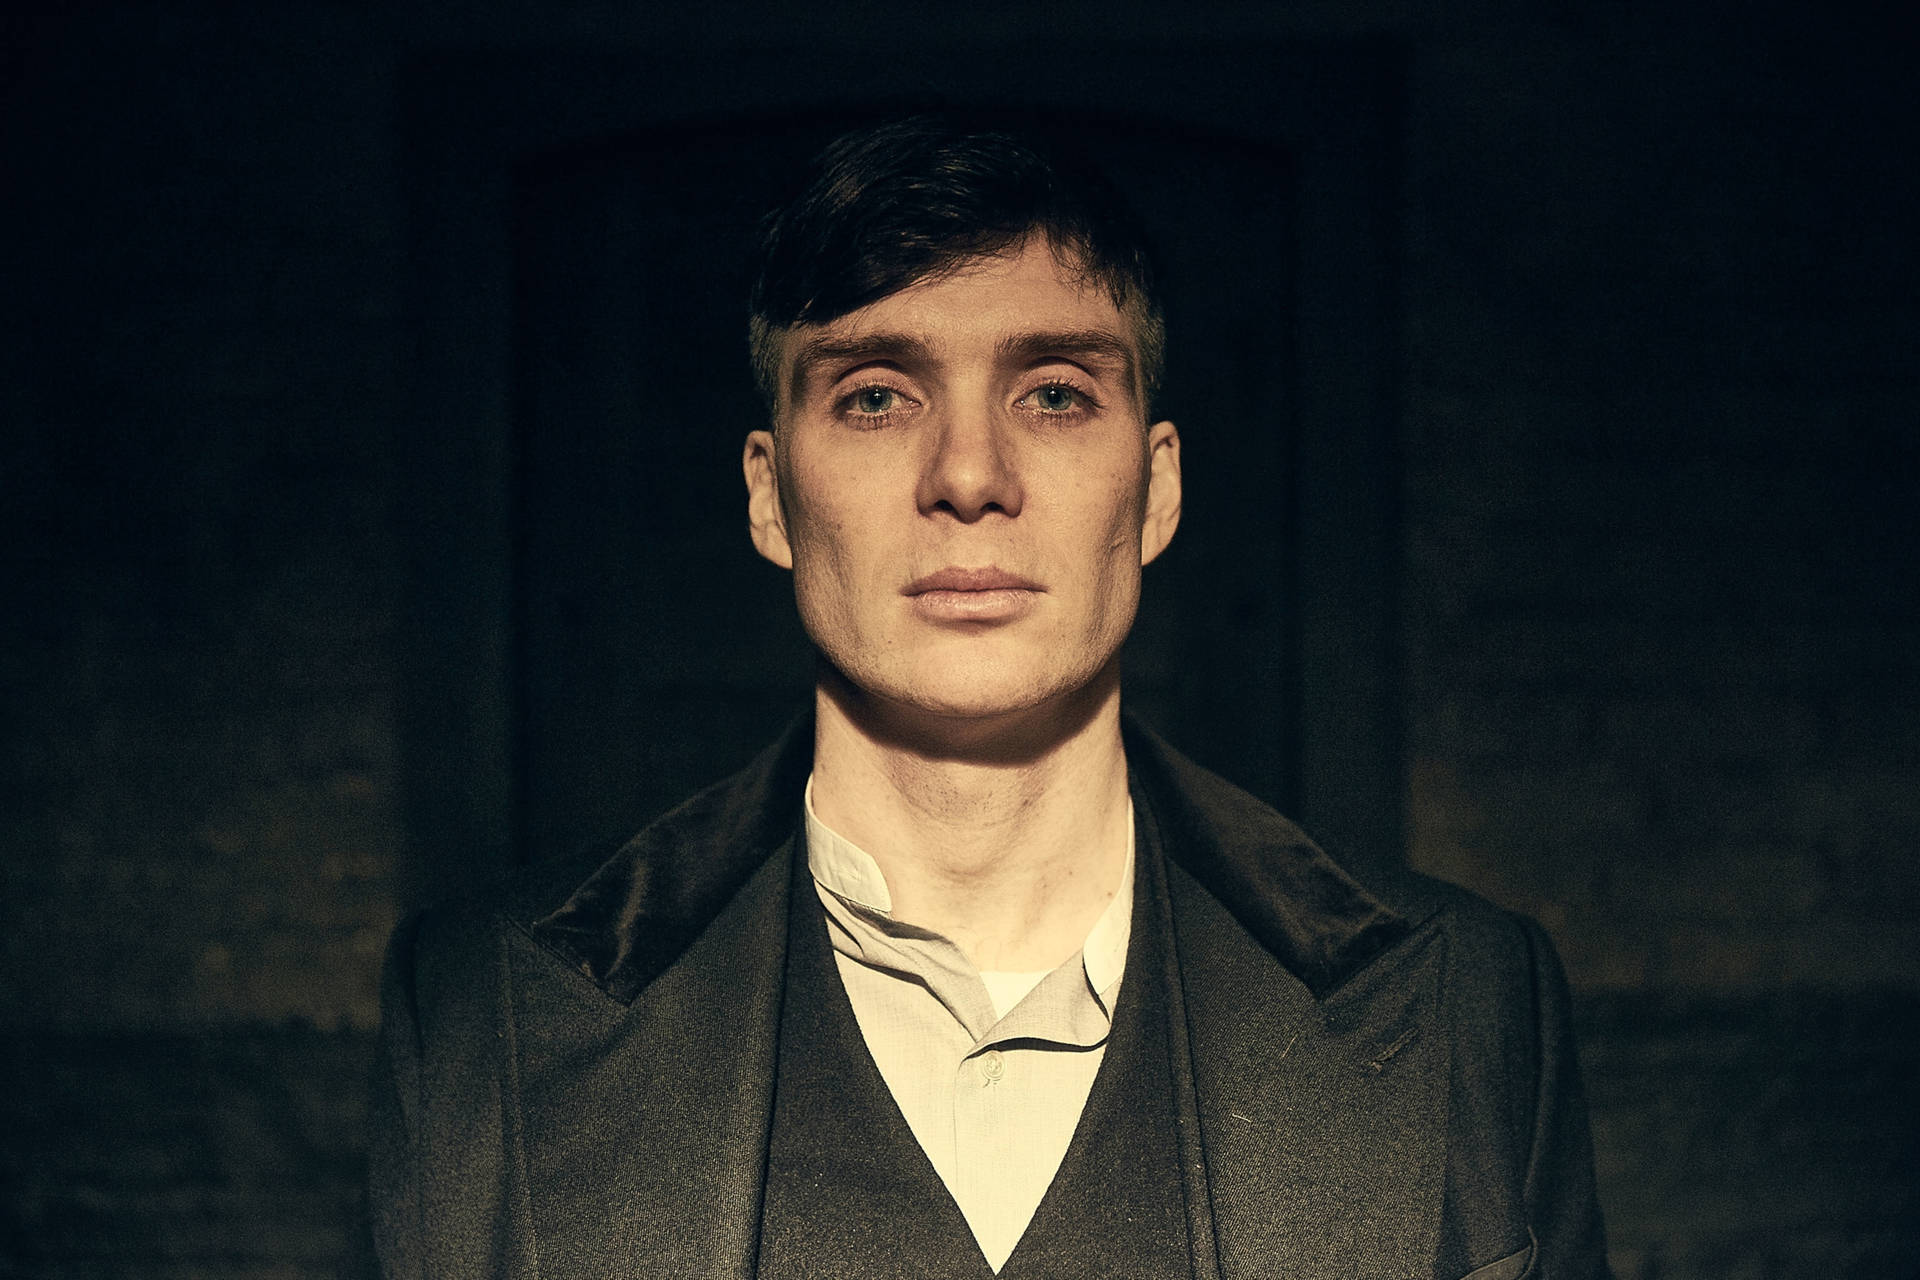 Top 999+ Tommy Shelby 4k Wallpaper Full HD, 4K✅Free to Use